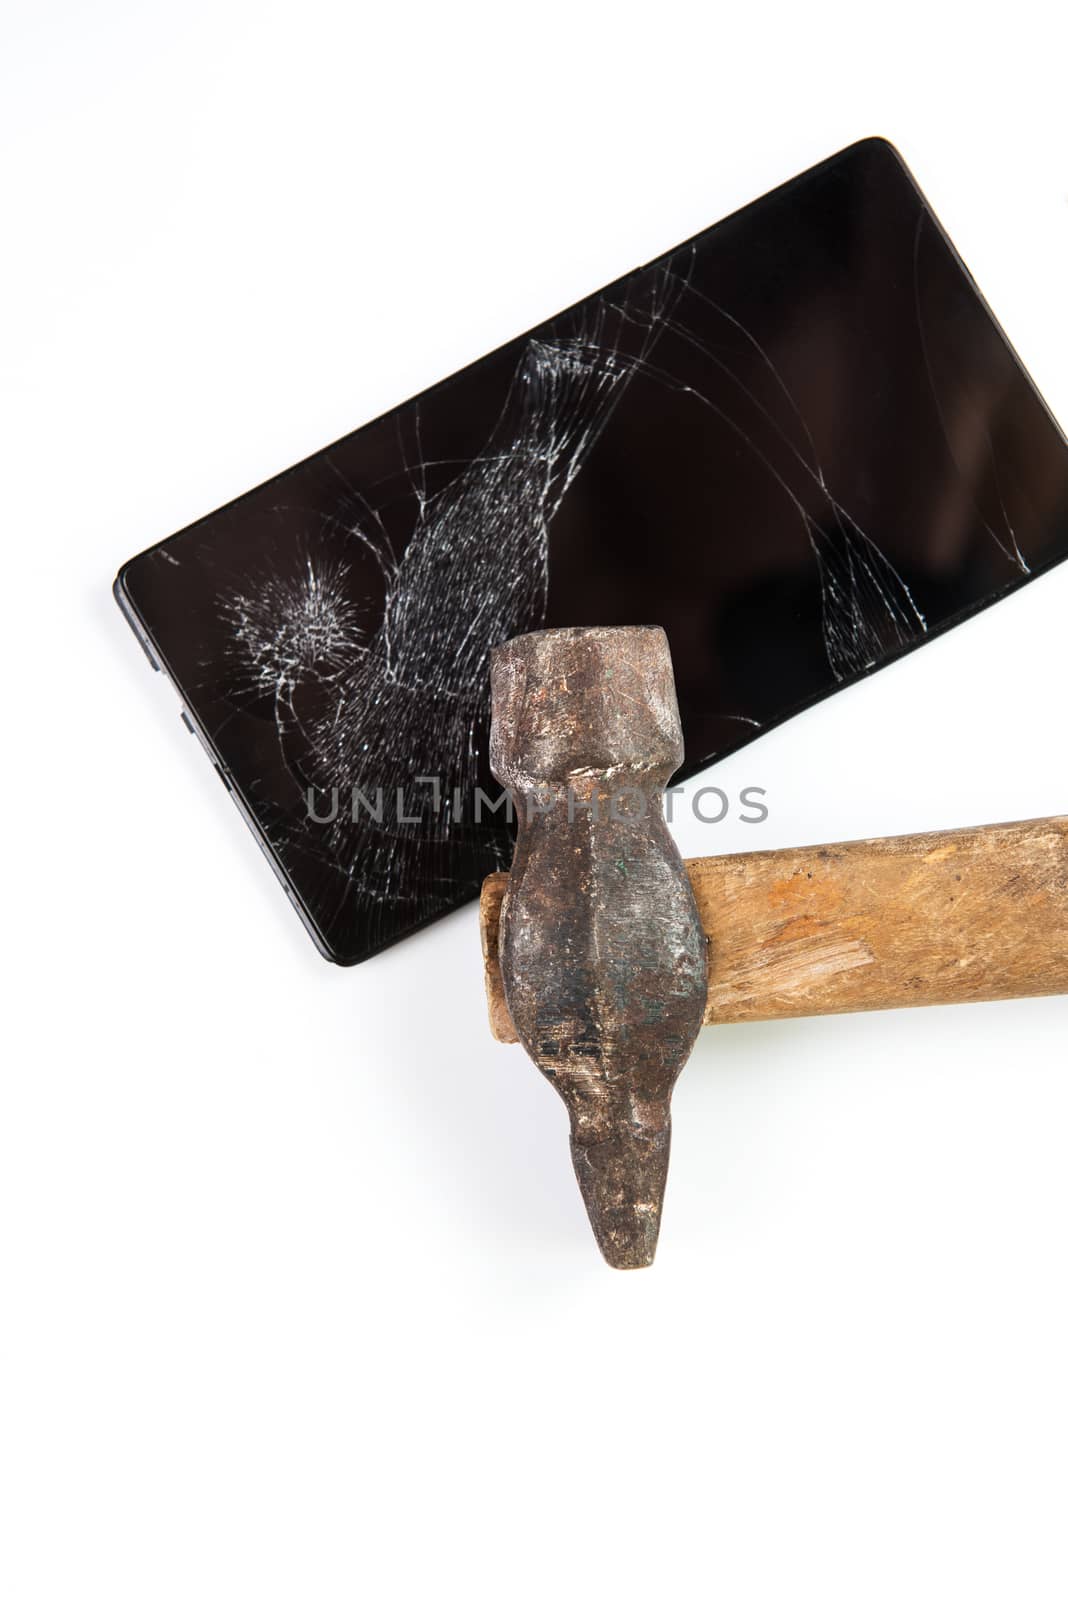 An old hammer and smartphone by rusak